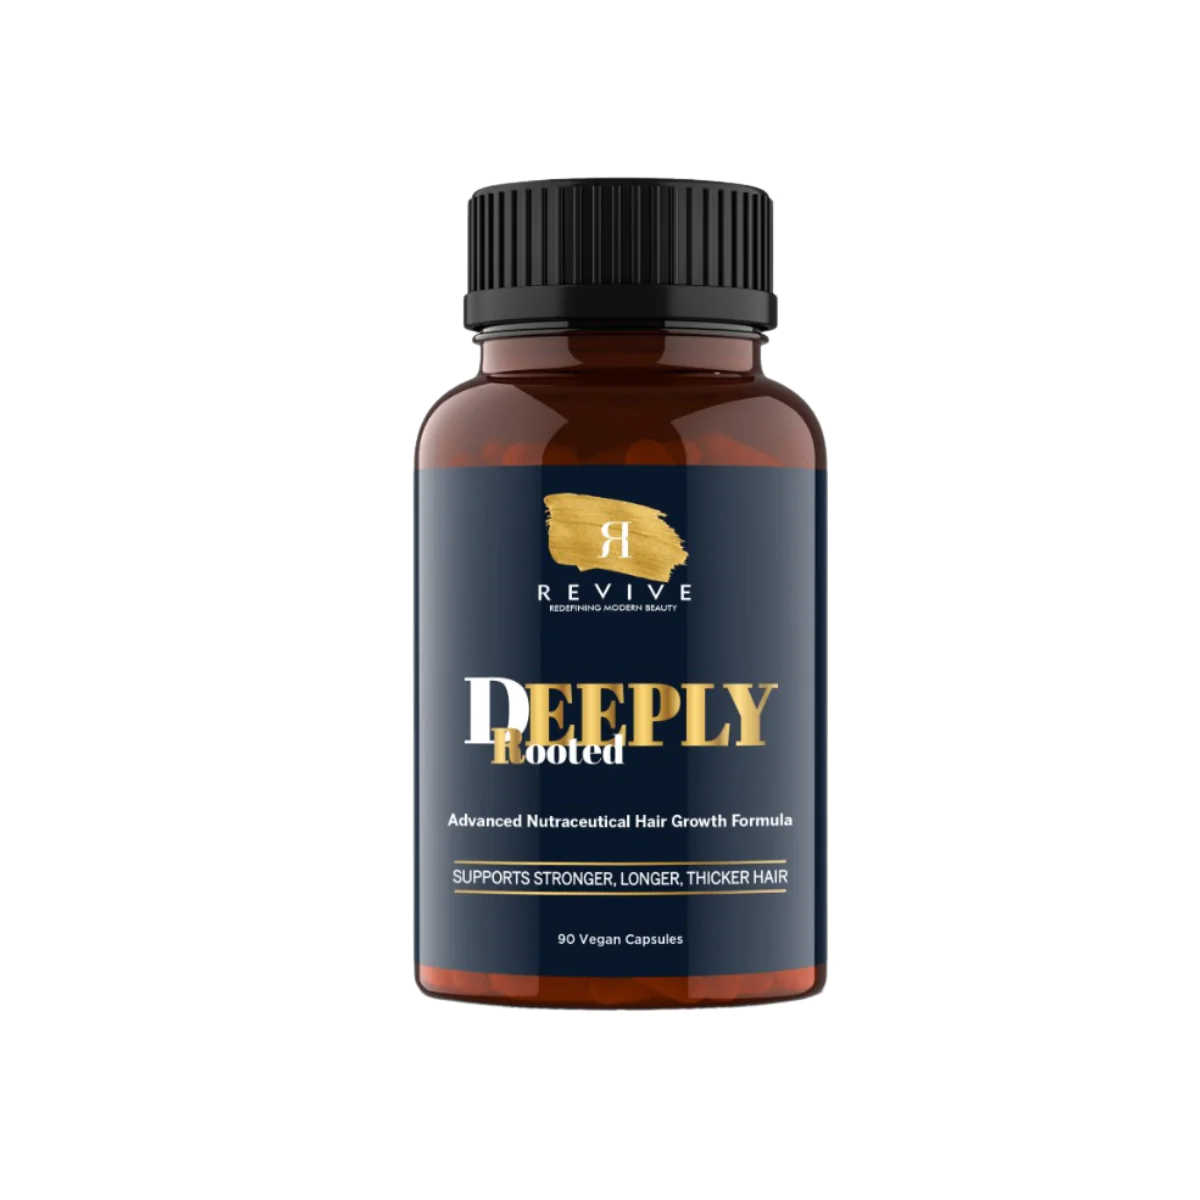 DEEPLY ROOTED – Advanced Nutraceutical Hair Growth Formula